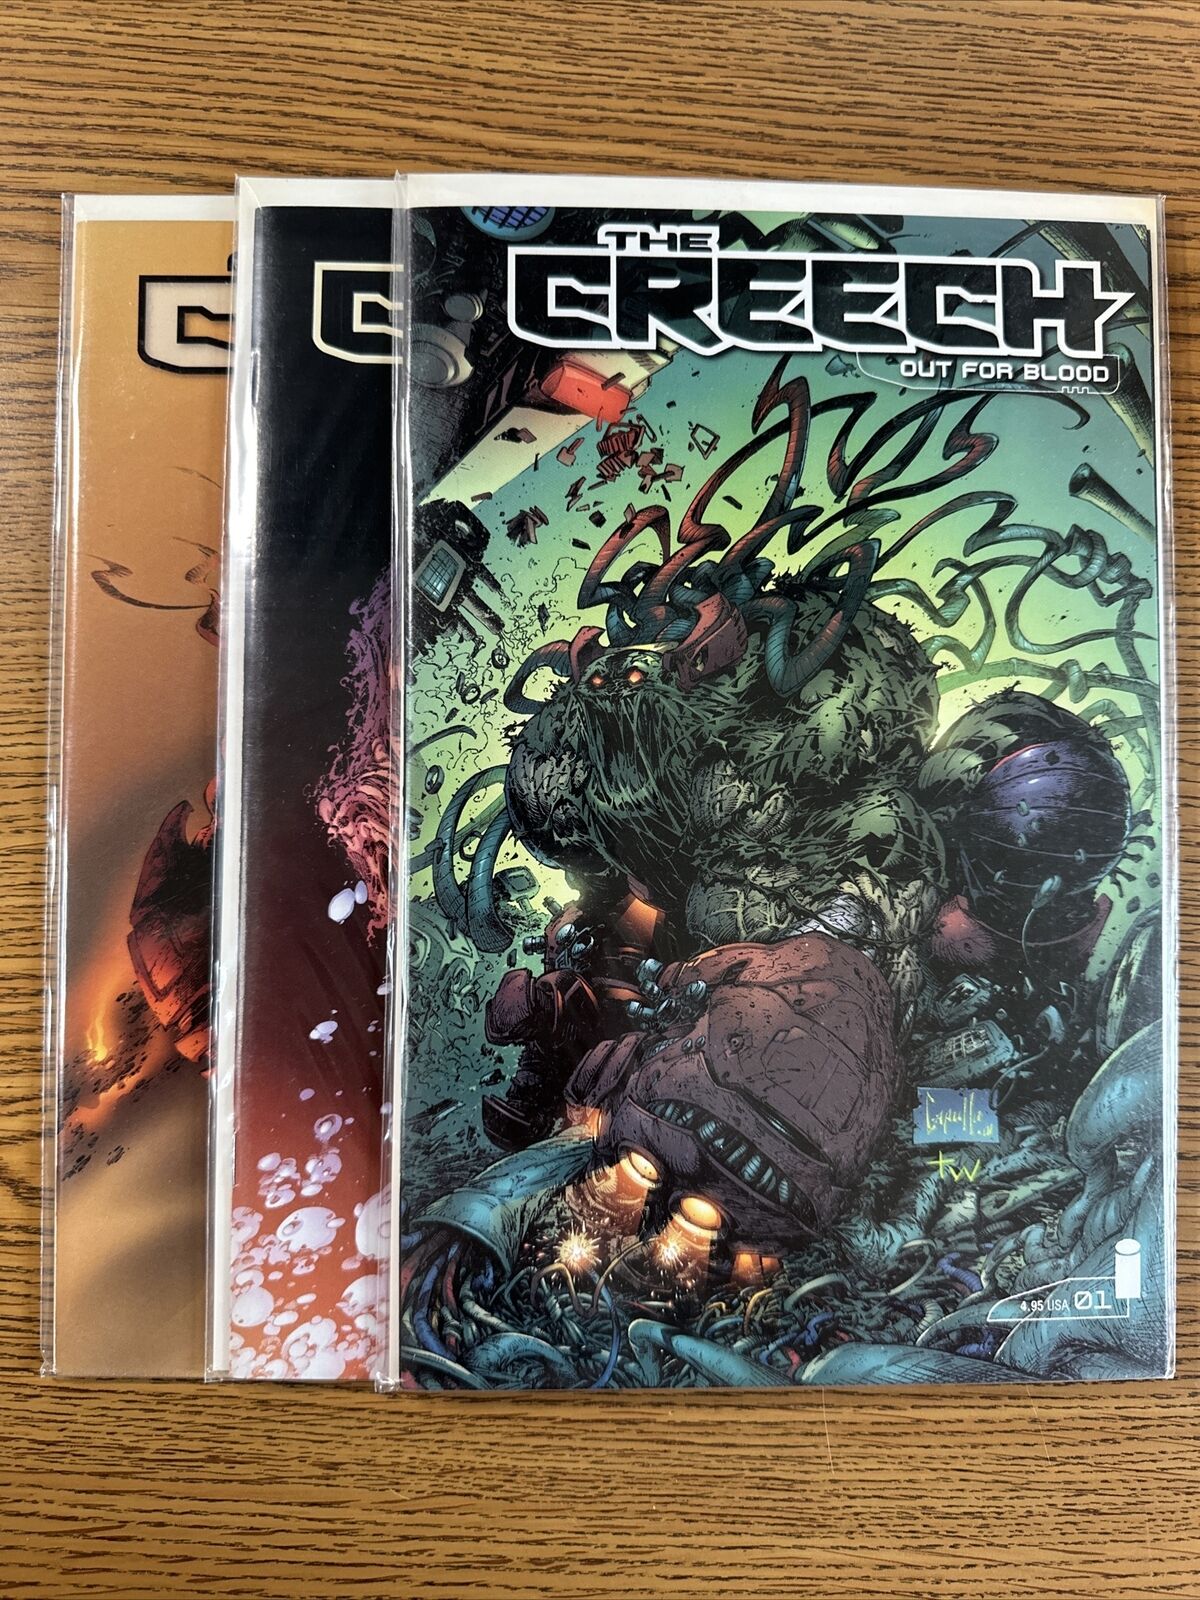 THE CREECH #1 2 3 Out For Blood Complete Set Greg Capullo lot run VF/NM